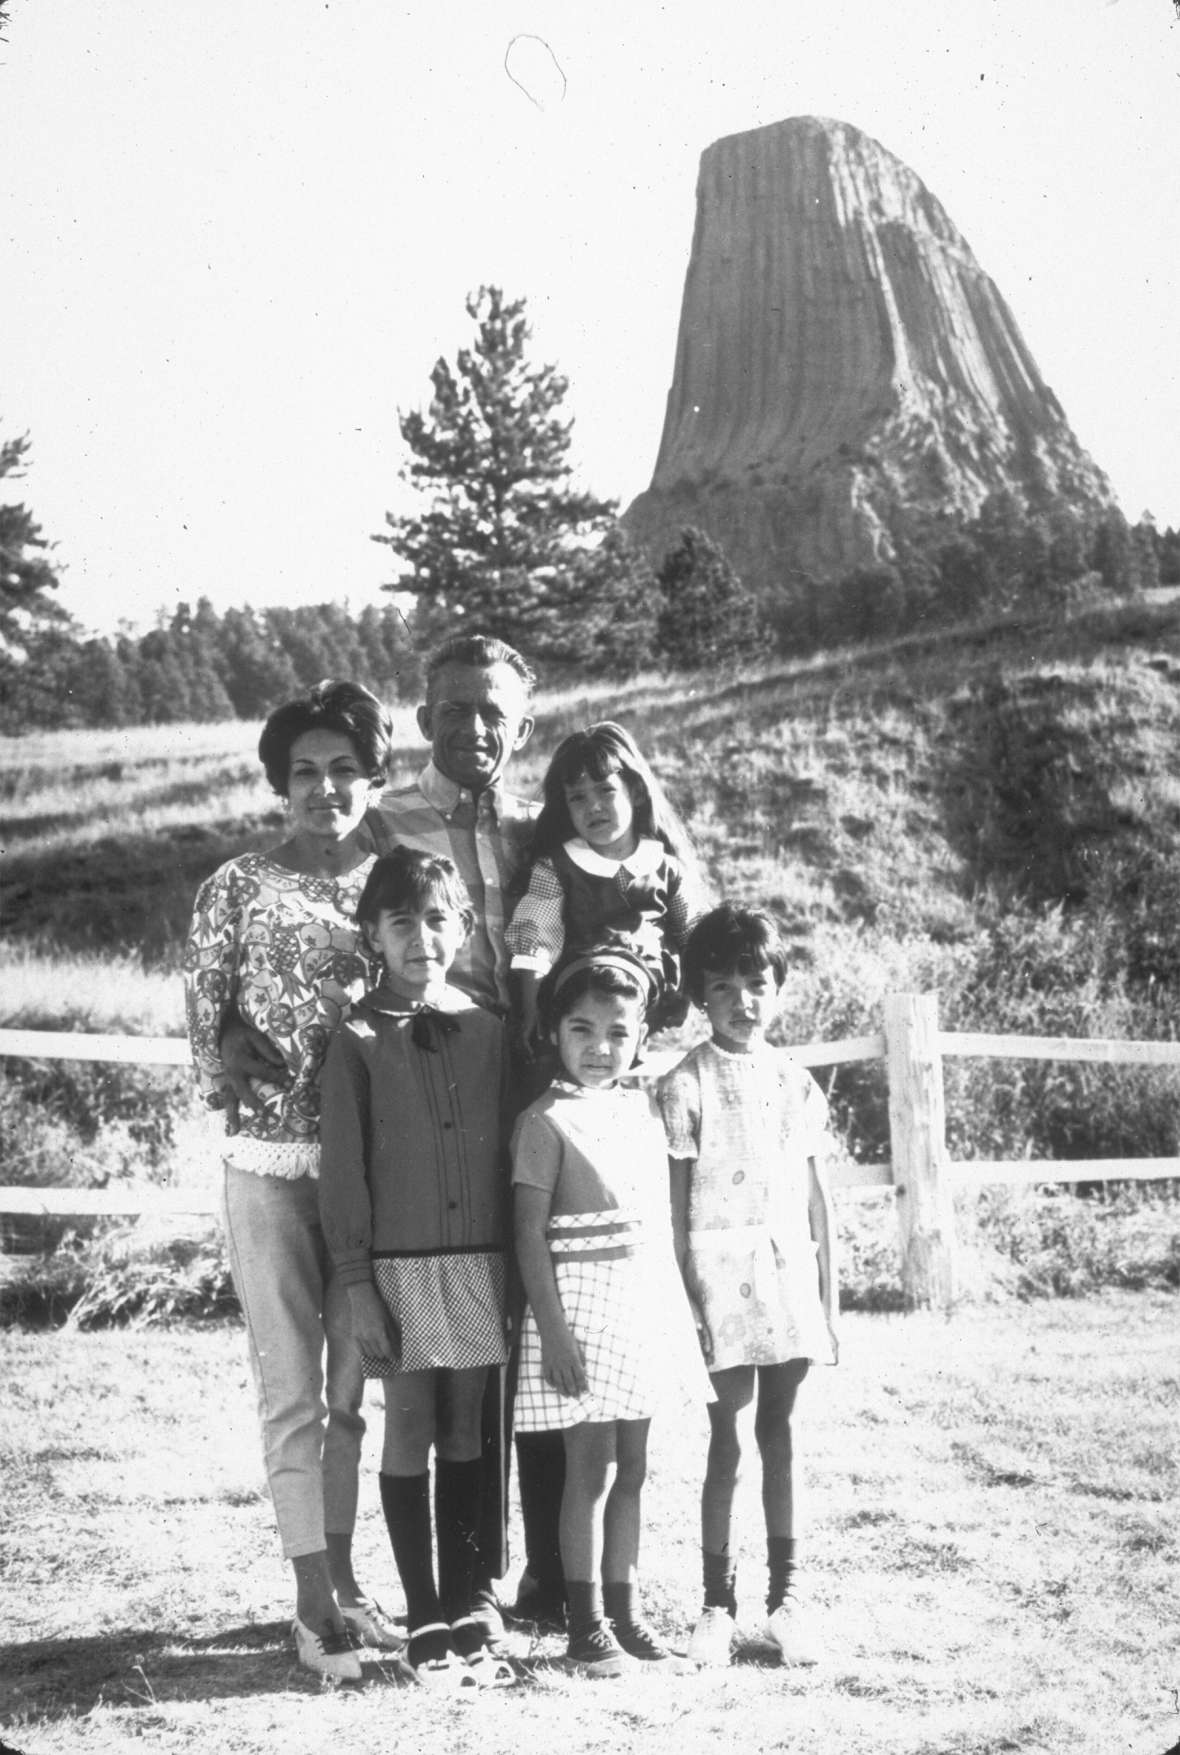 At an airshow in Mexico in 1958, Hopkins said later, "I suddenly asked myself what I was doing there,” and finally quit the daredevil business. In 1967, he visited Devils Tower with his family. NPS photo.